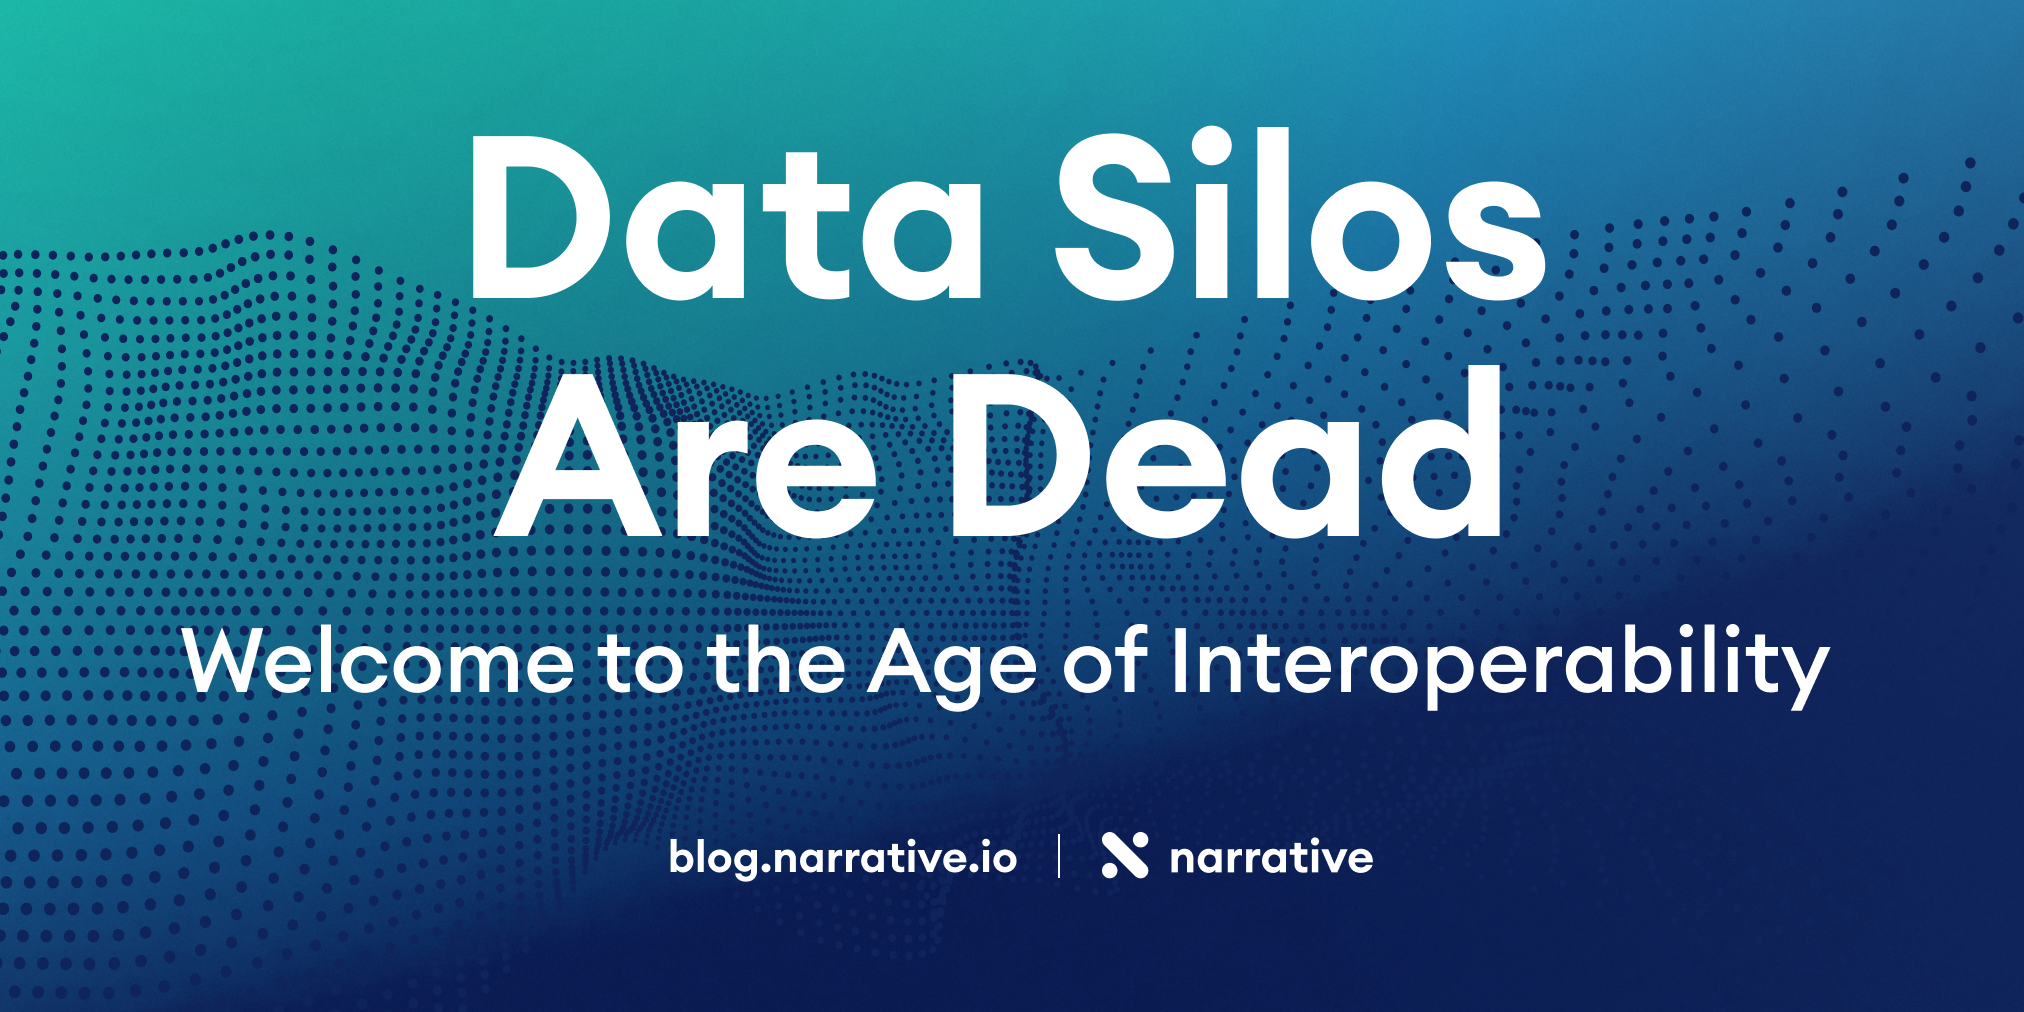 Data Silos Are Dead: Welcome to the Age of Interoperability